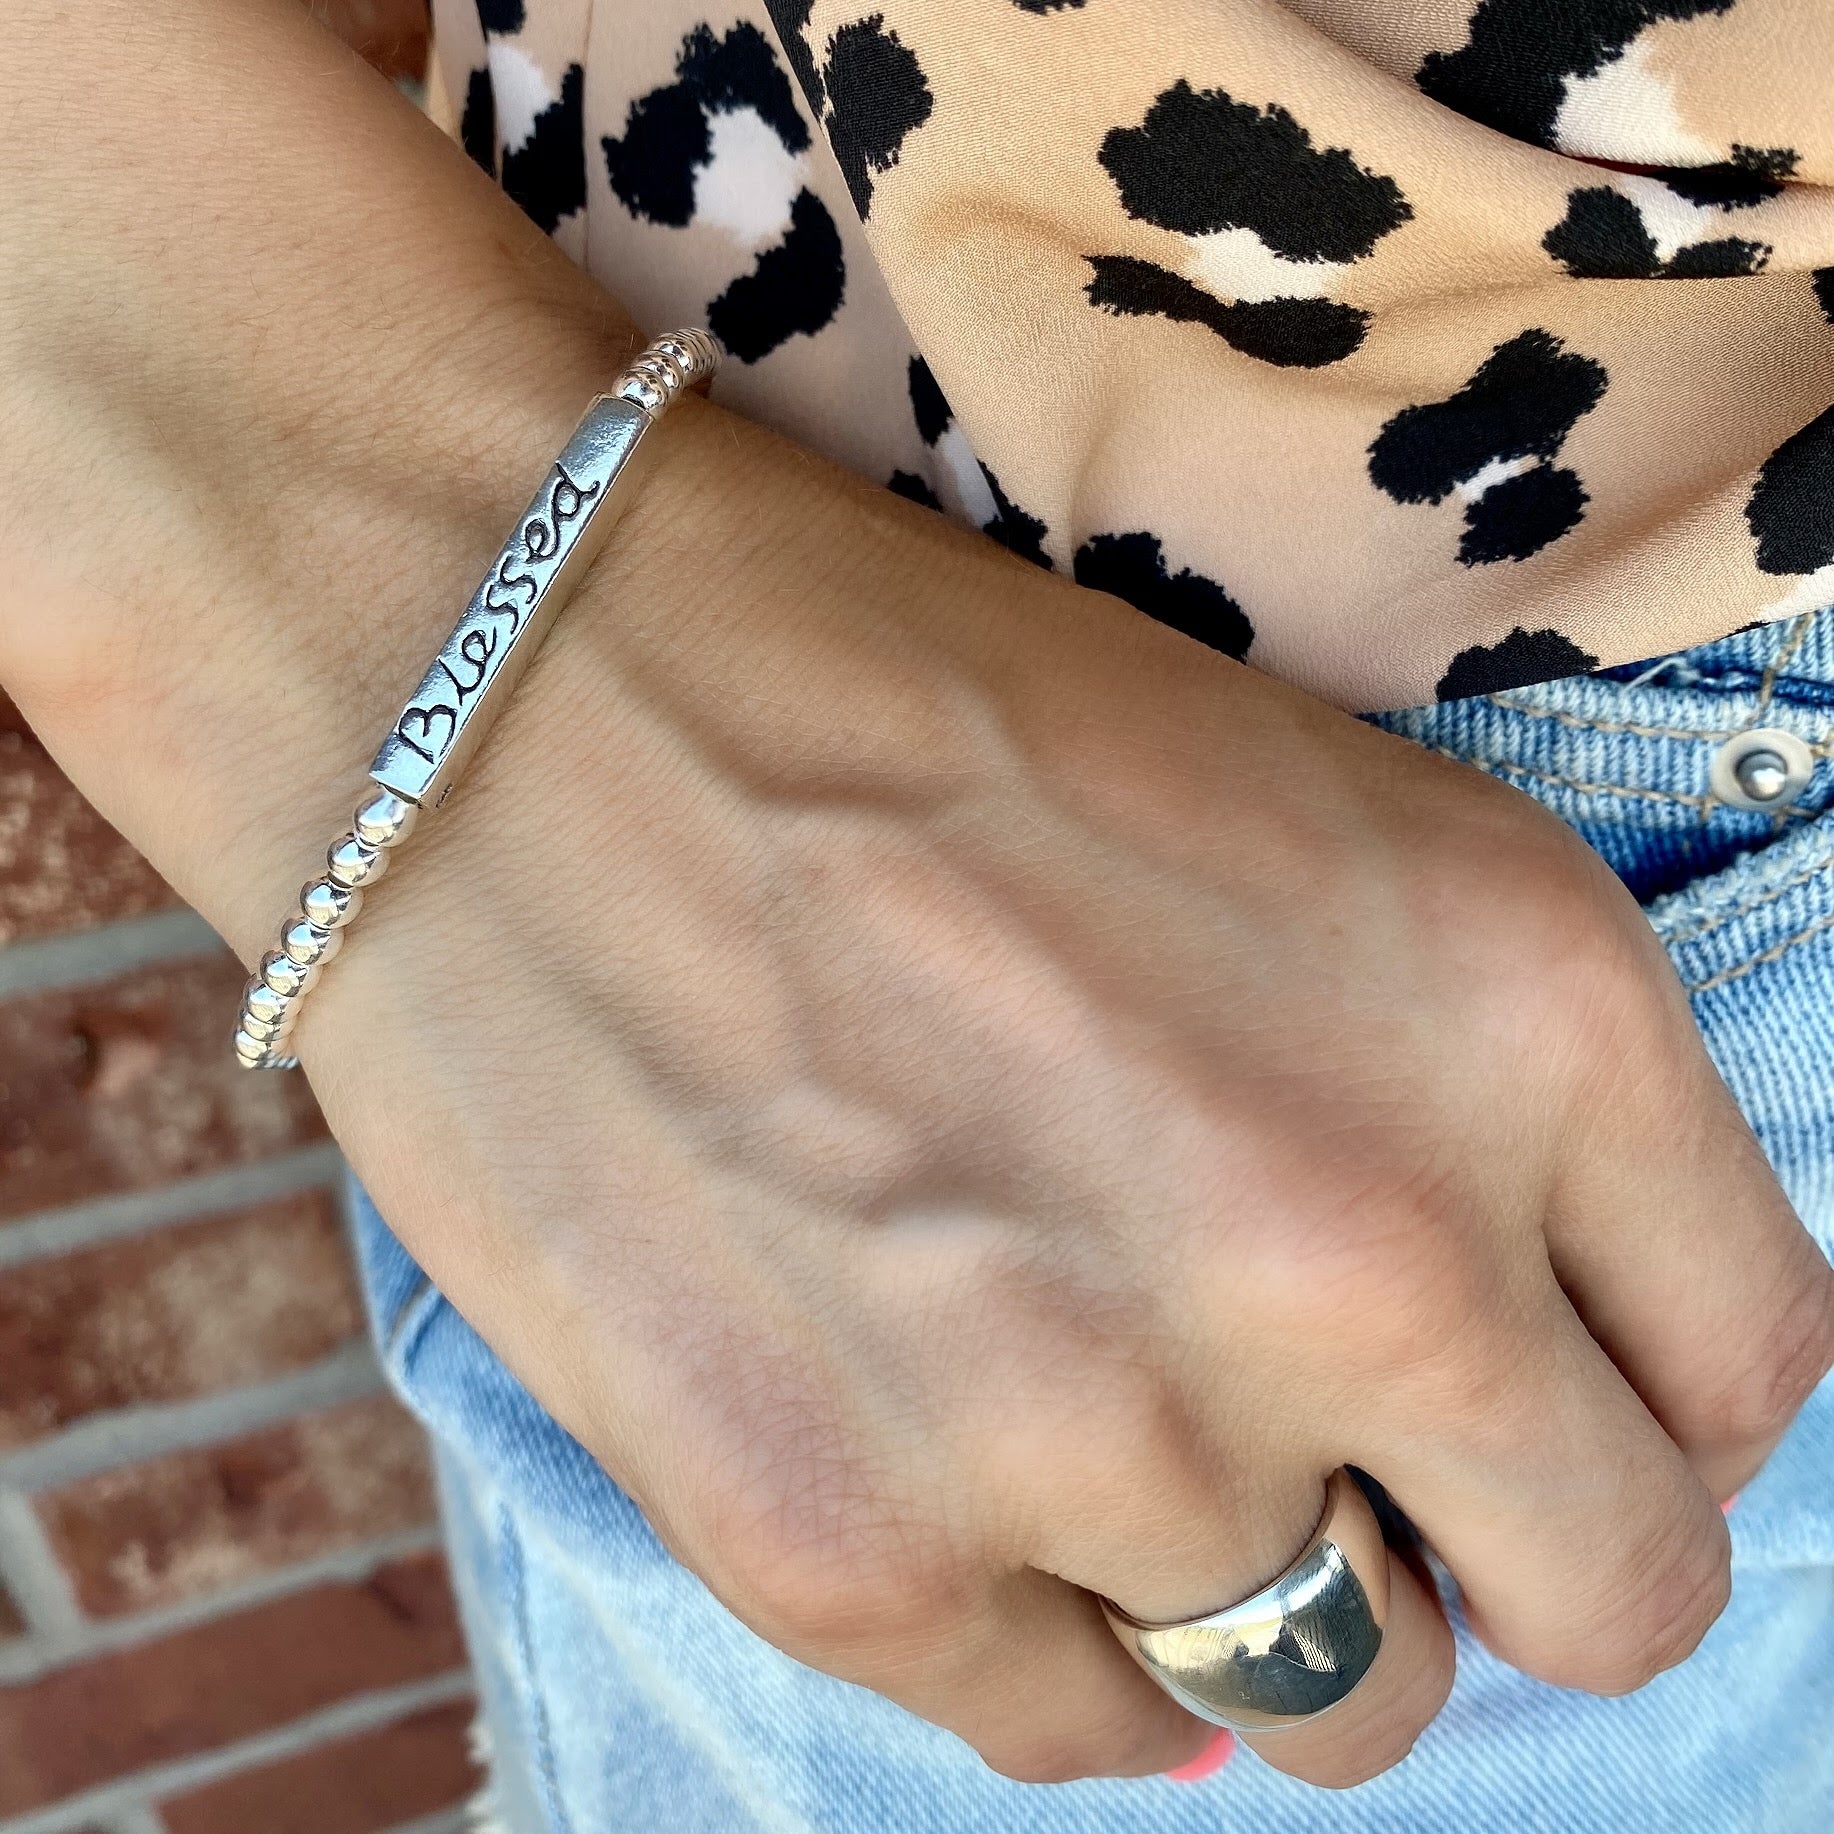 Thankful-Grateful-Bless Bracelet paired with Classic Dome Ring